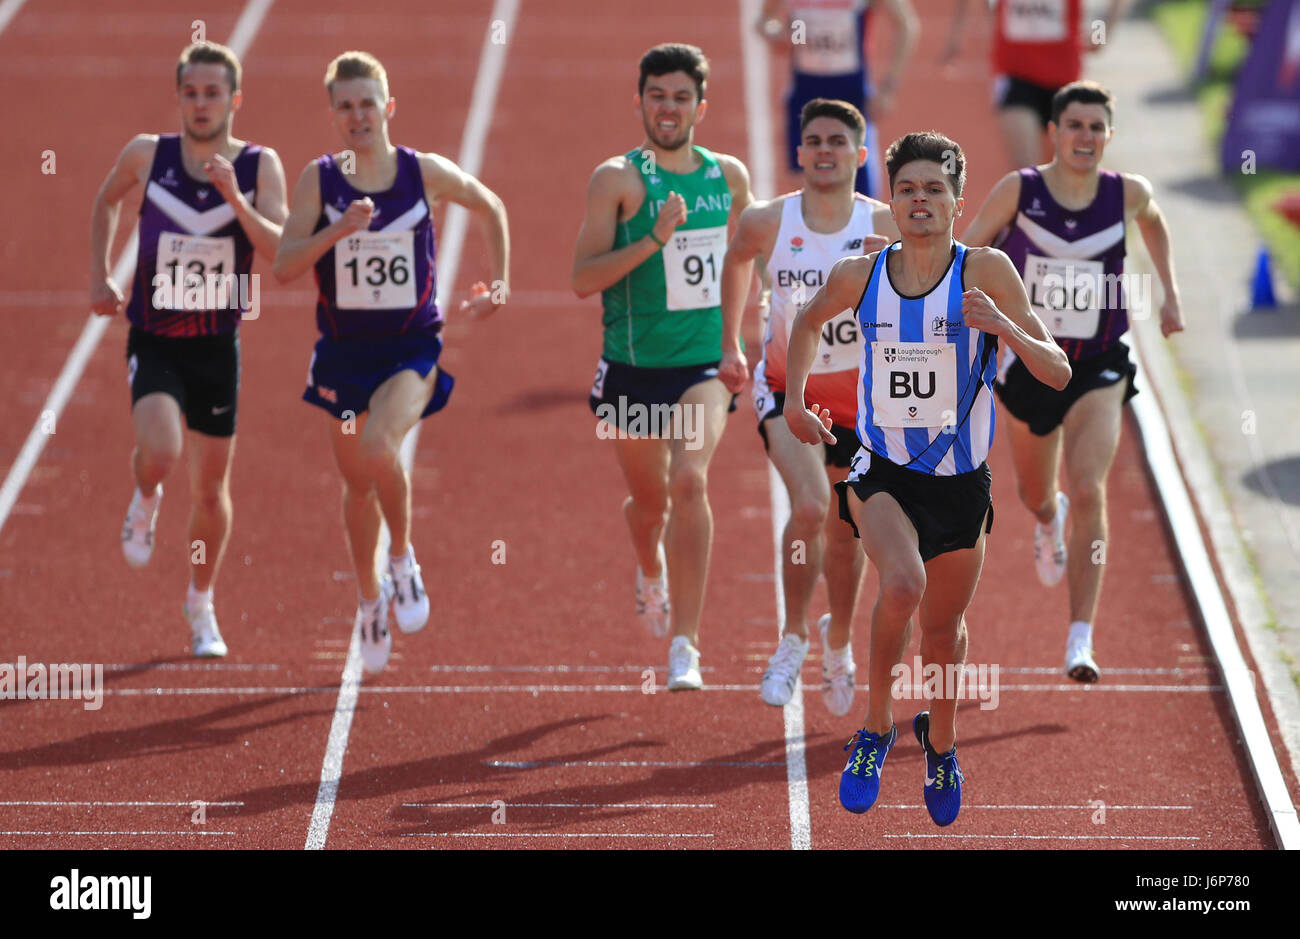 Tom Hook (right) in the 1500 Metre Men's Steeplechase Matchduring the Loughborough International Athletics Event at the Paula Radcliffe Stadium. Stock Photo